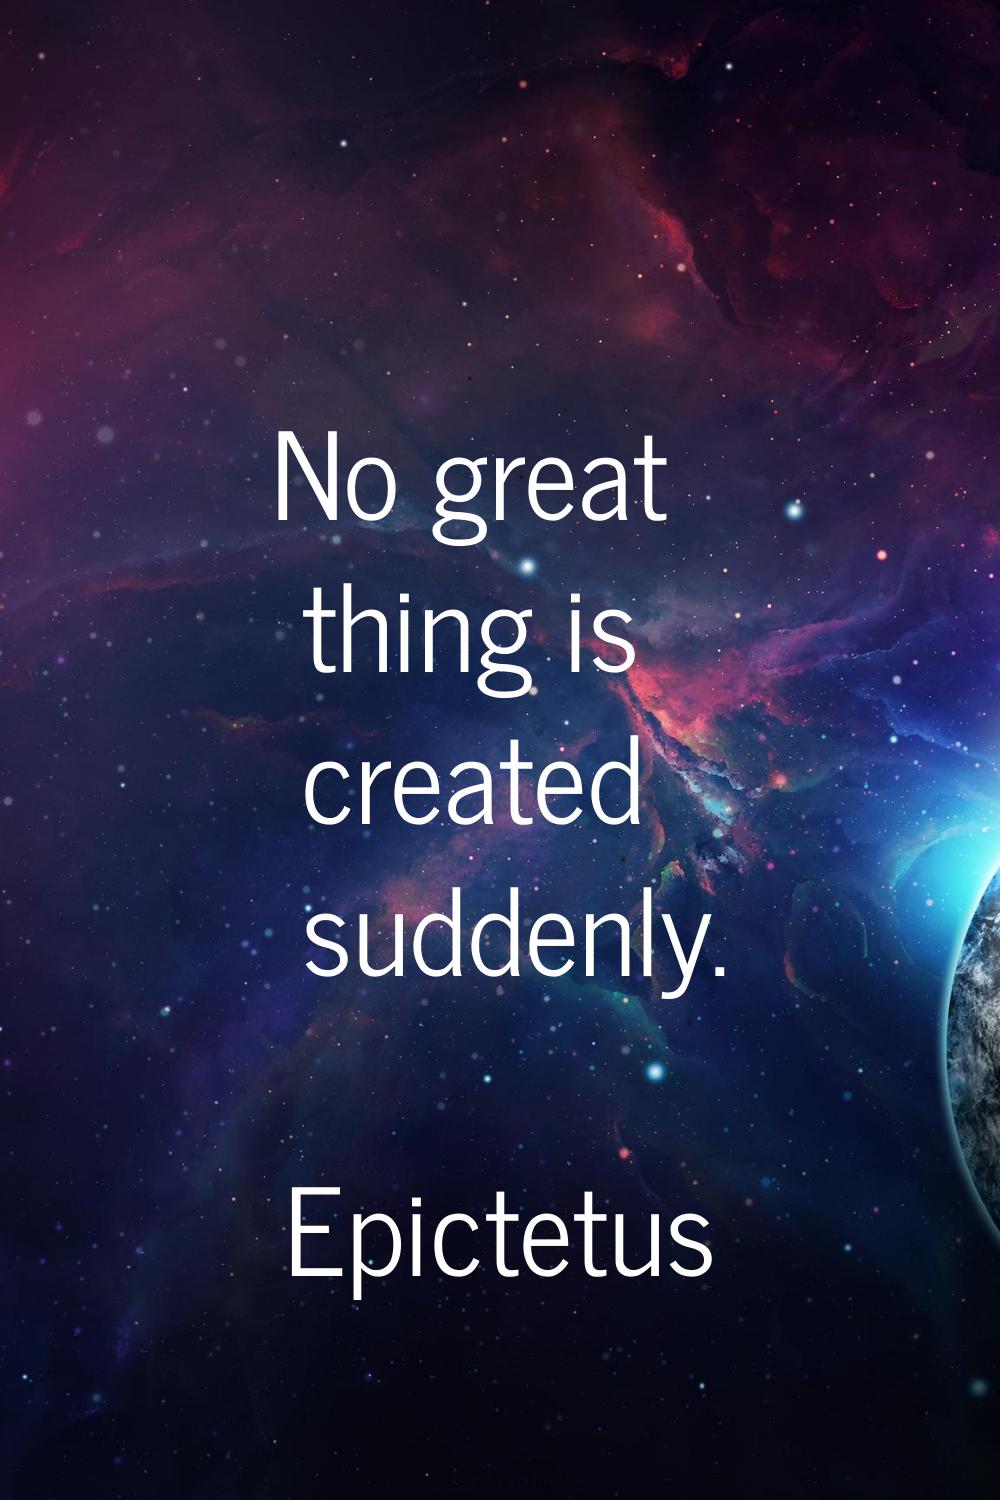 No great thing is created suddenly.